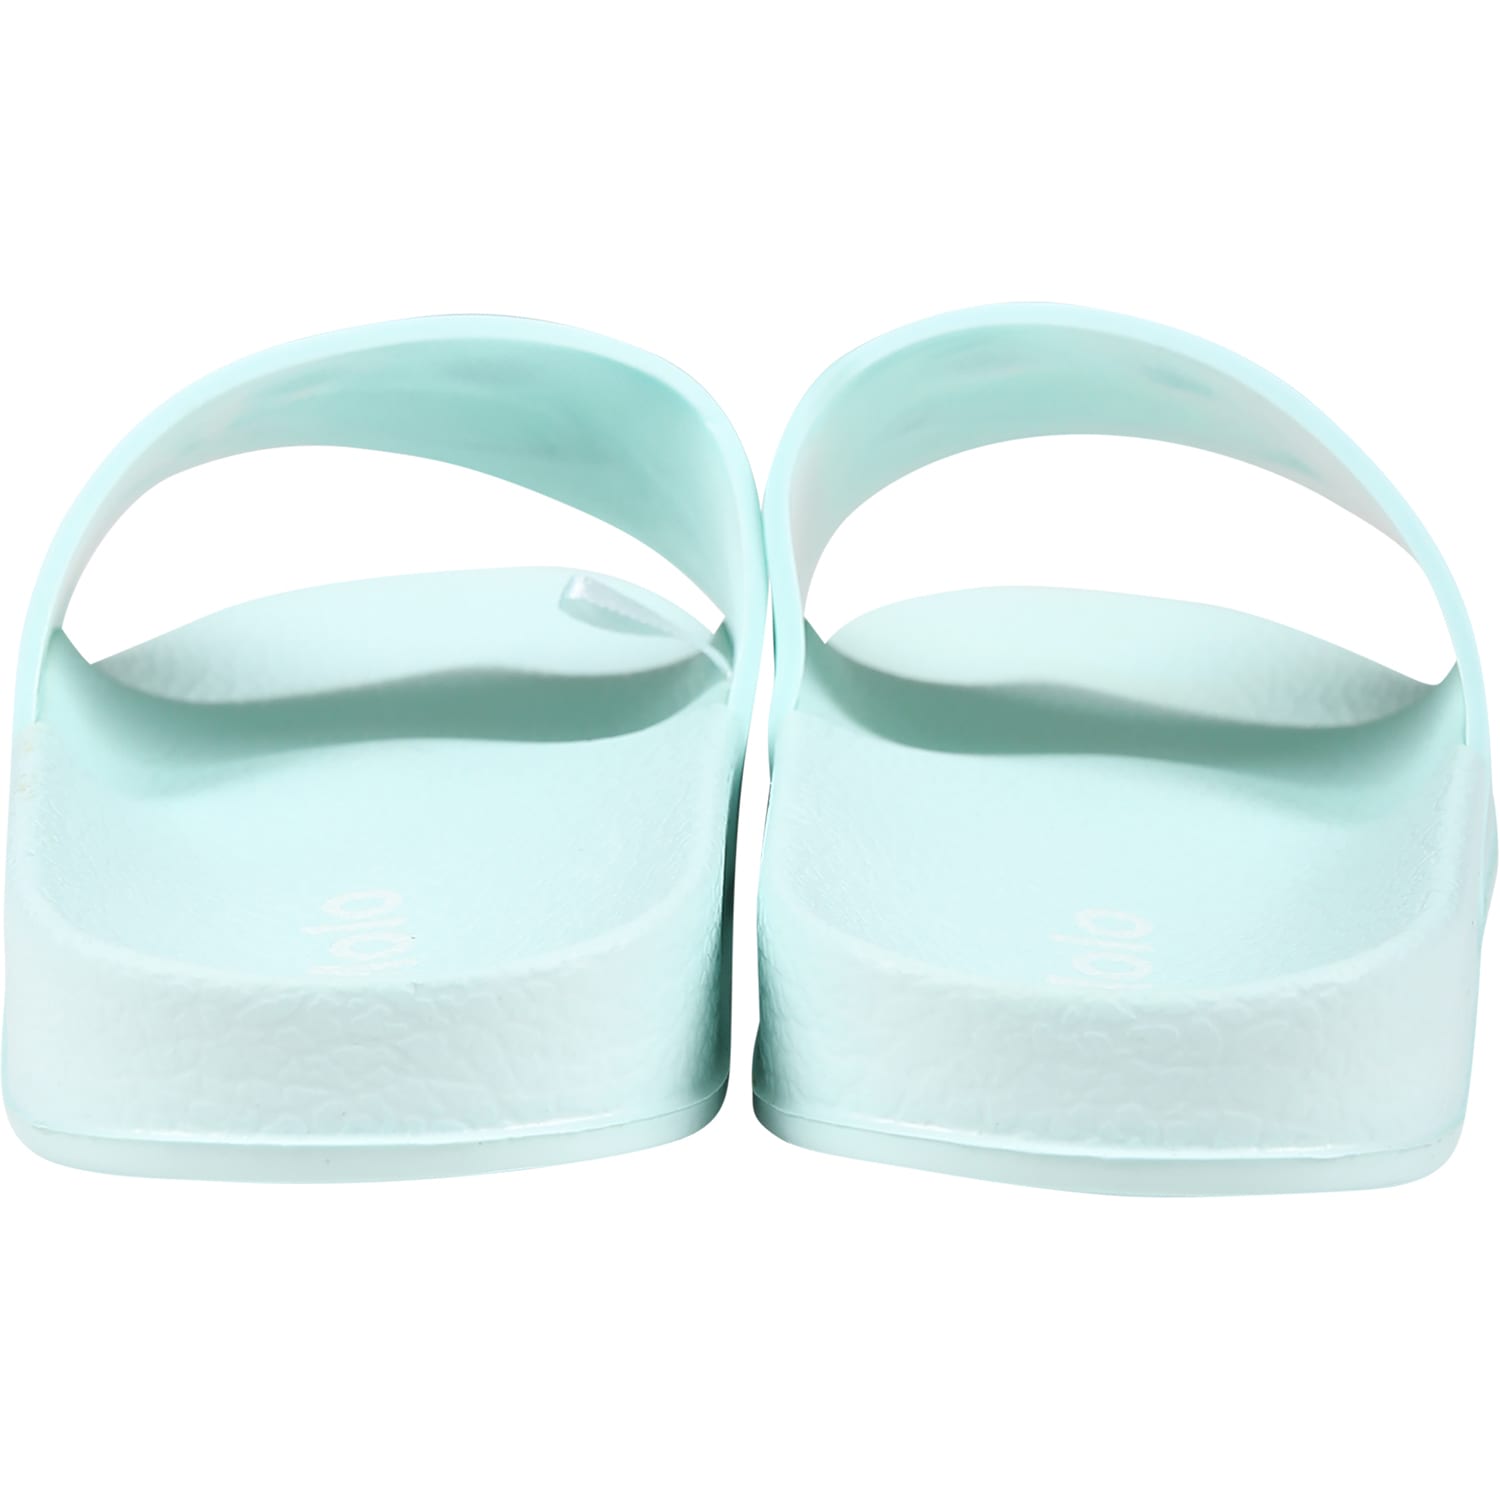 Shop Molo Green Slippers For Kids With Smiley